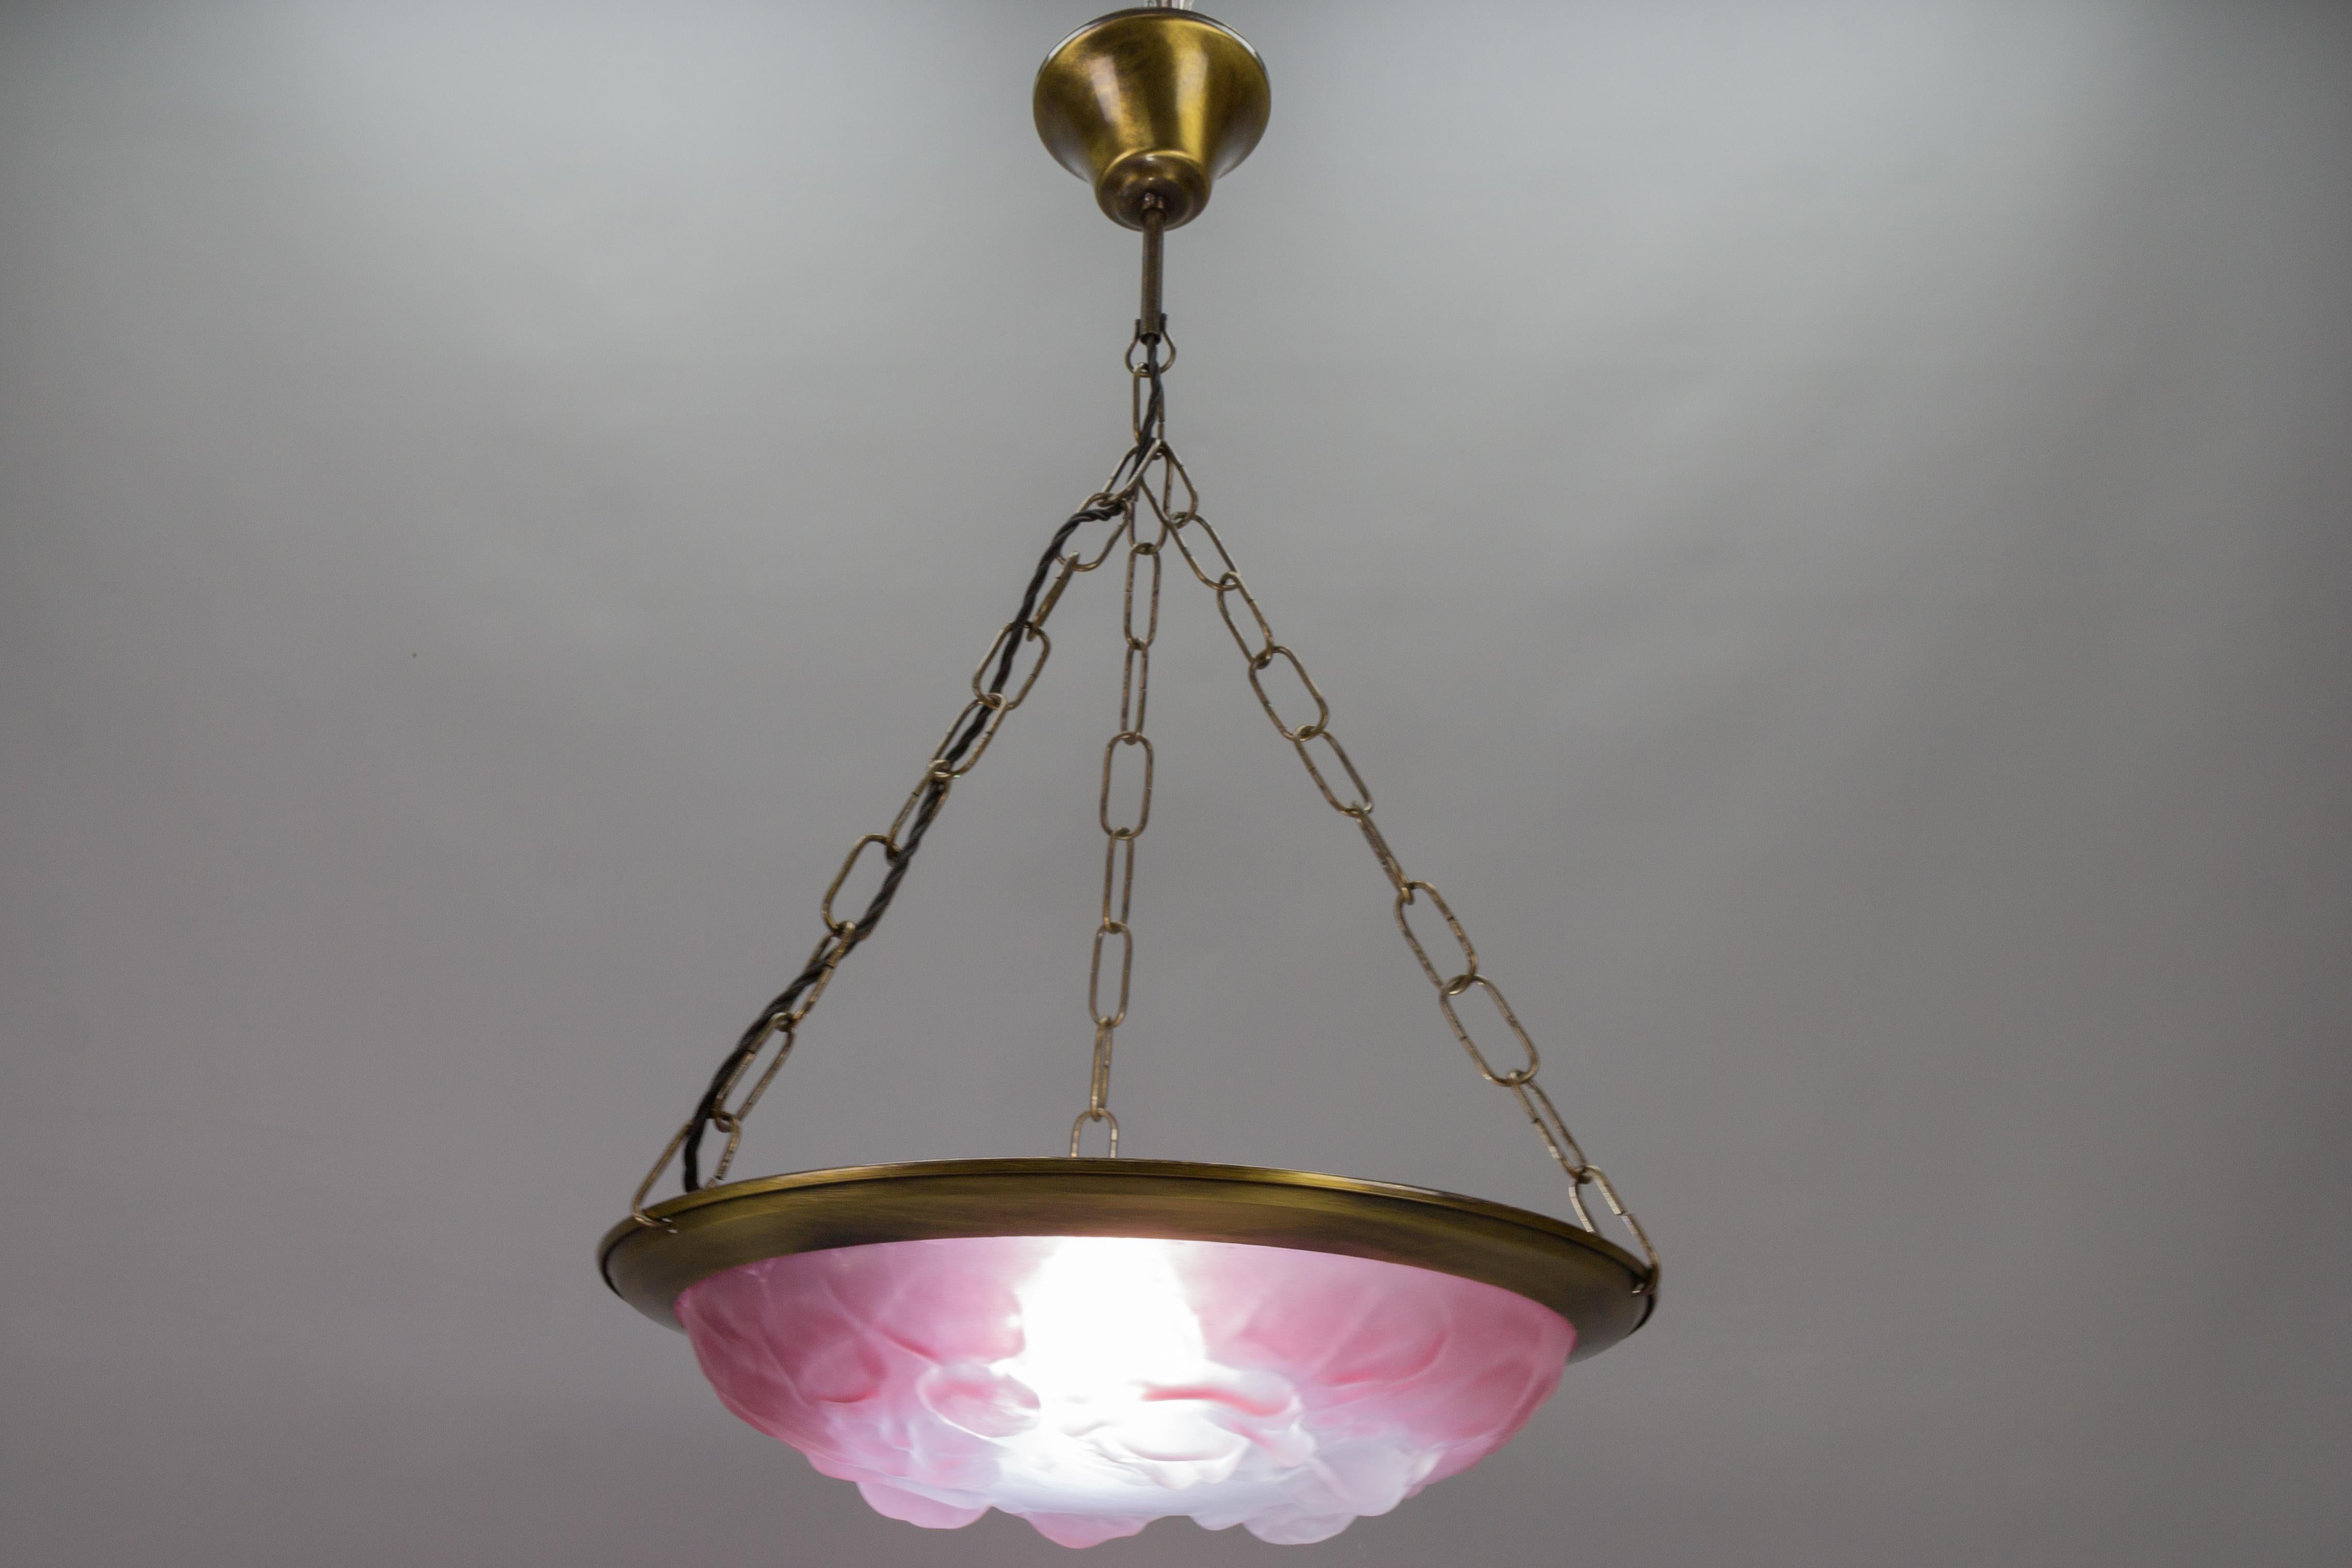 Late 20th Century French Vintage Art Deco Style Pink and White Glass Pendant Light with Roses